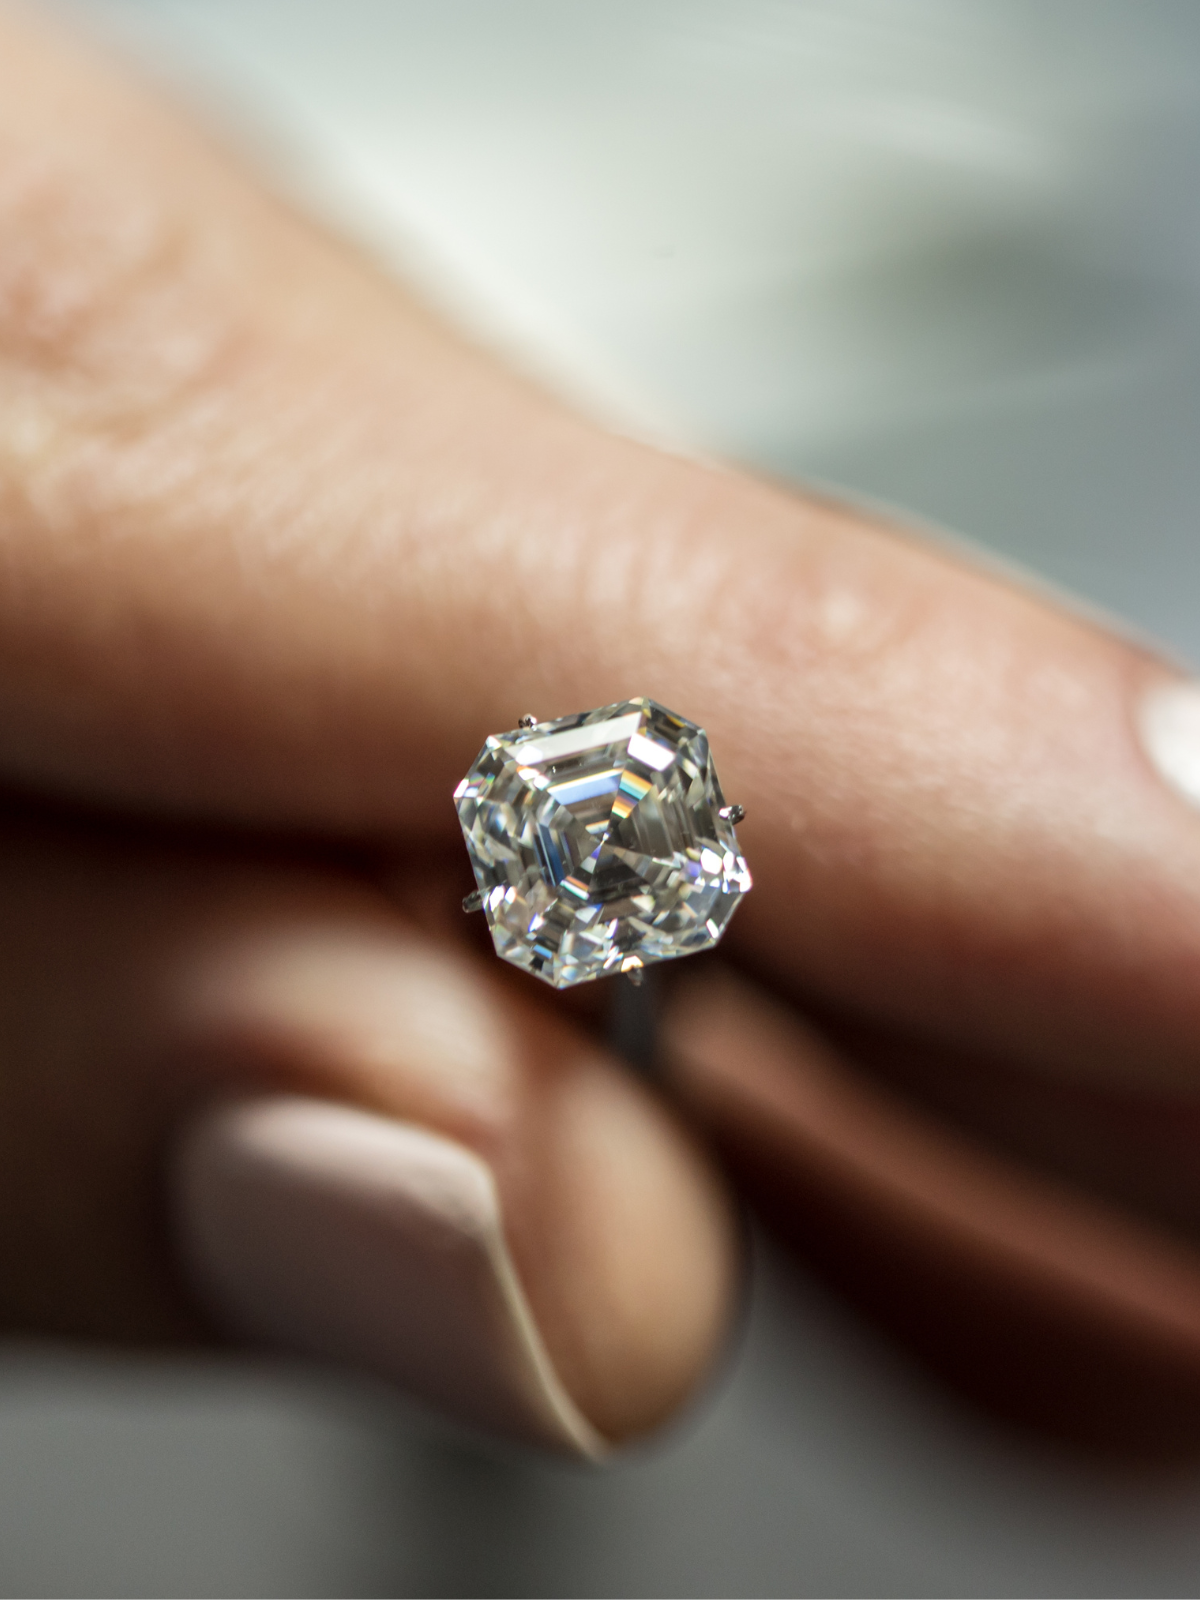 How Much Is A 10 Carat Diamond Ring? – Mervis Diamond Importers